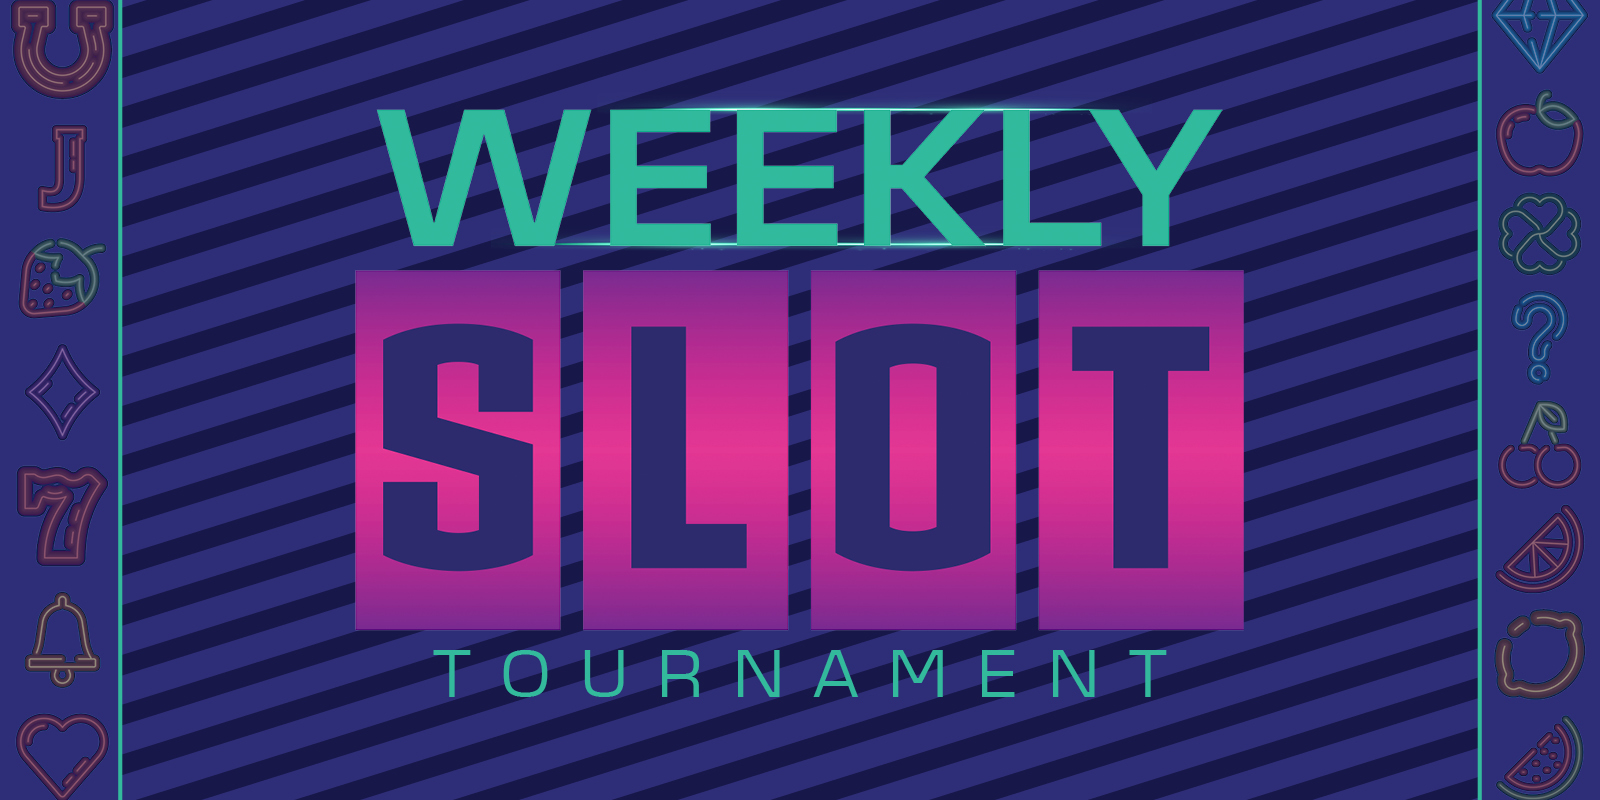 Tuesday Weekly Slot Tournament in April